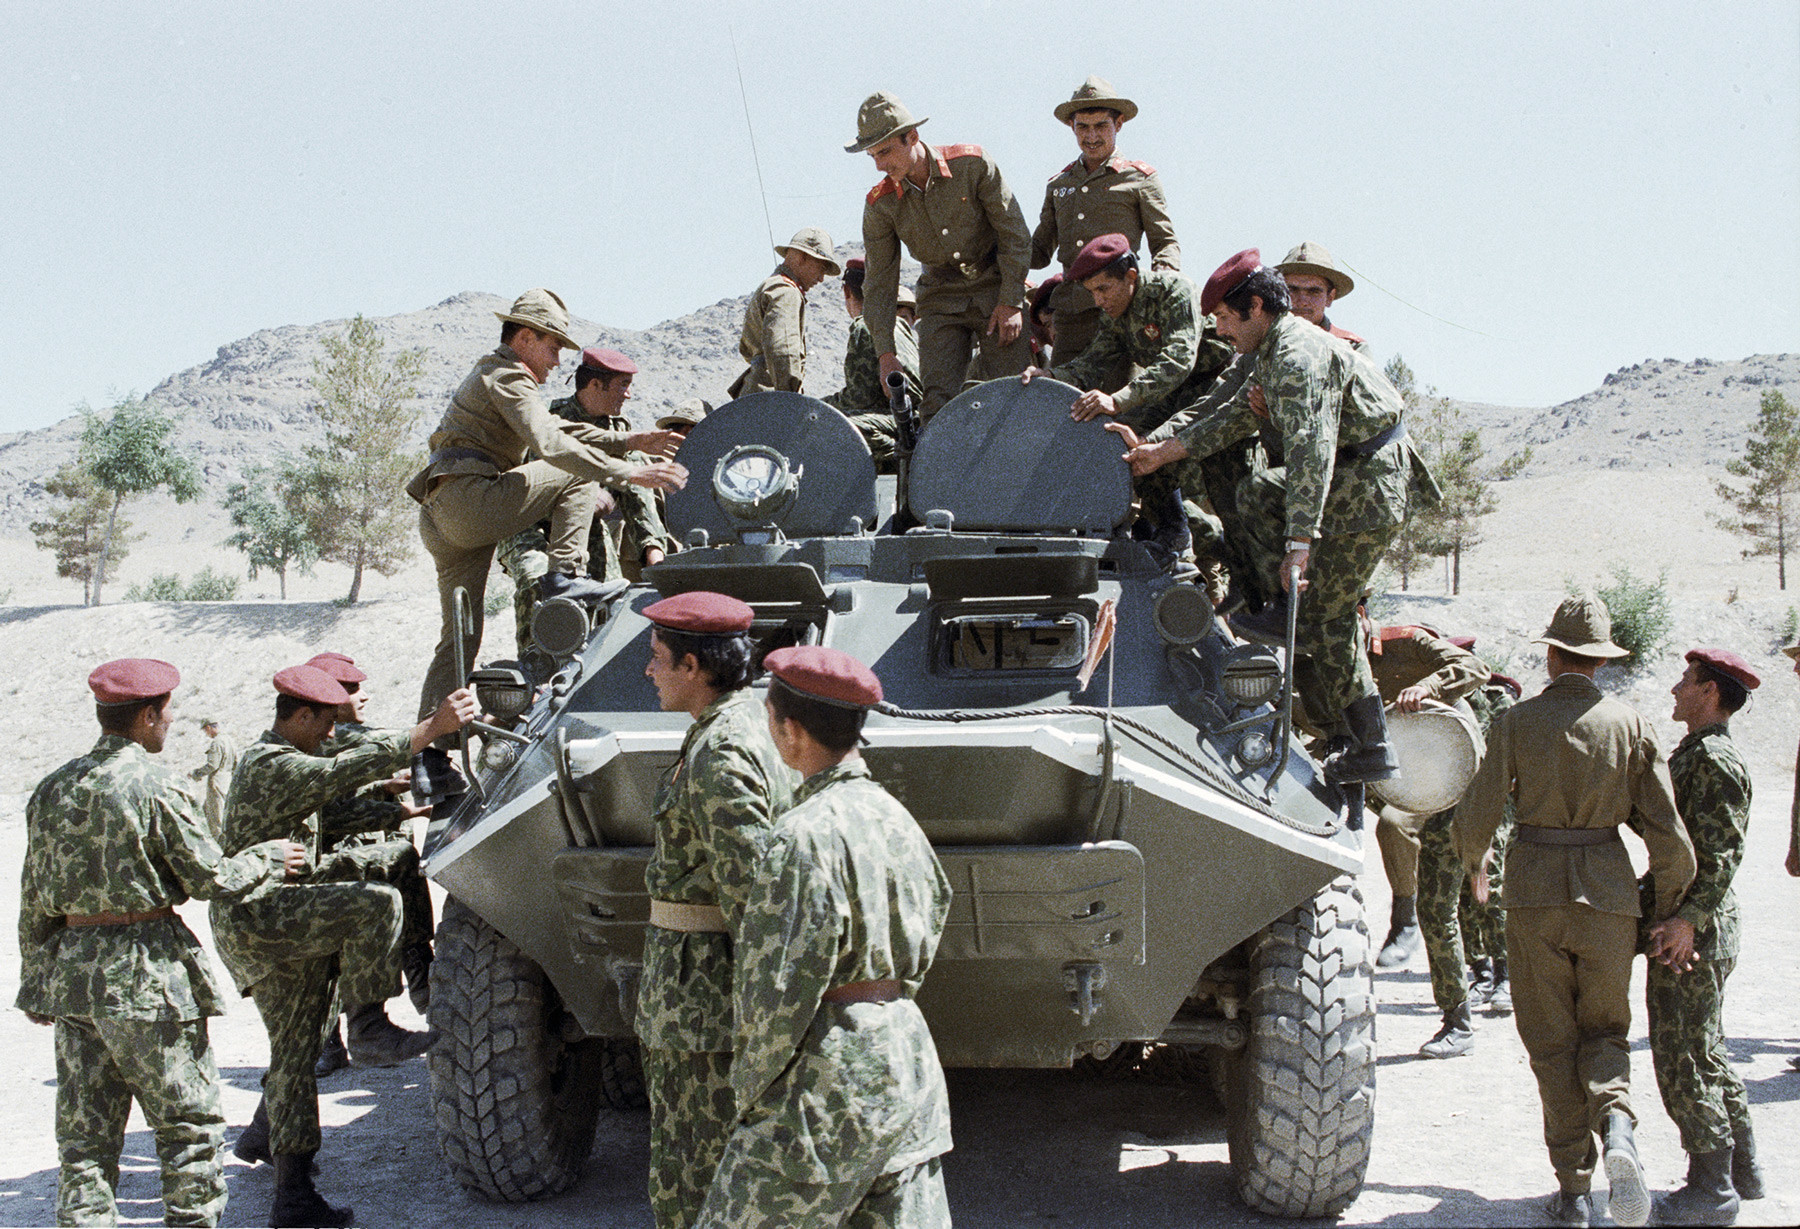 Soviet soldiers are showing their military equipment to Afghan paratroopers.
